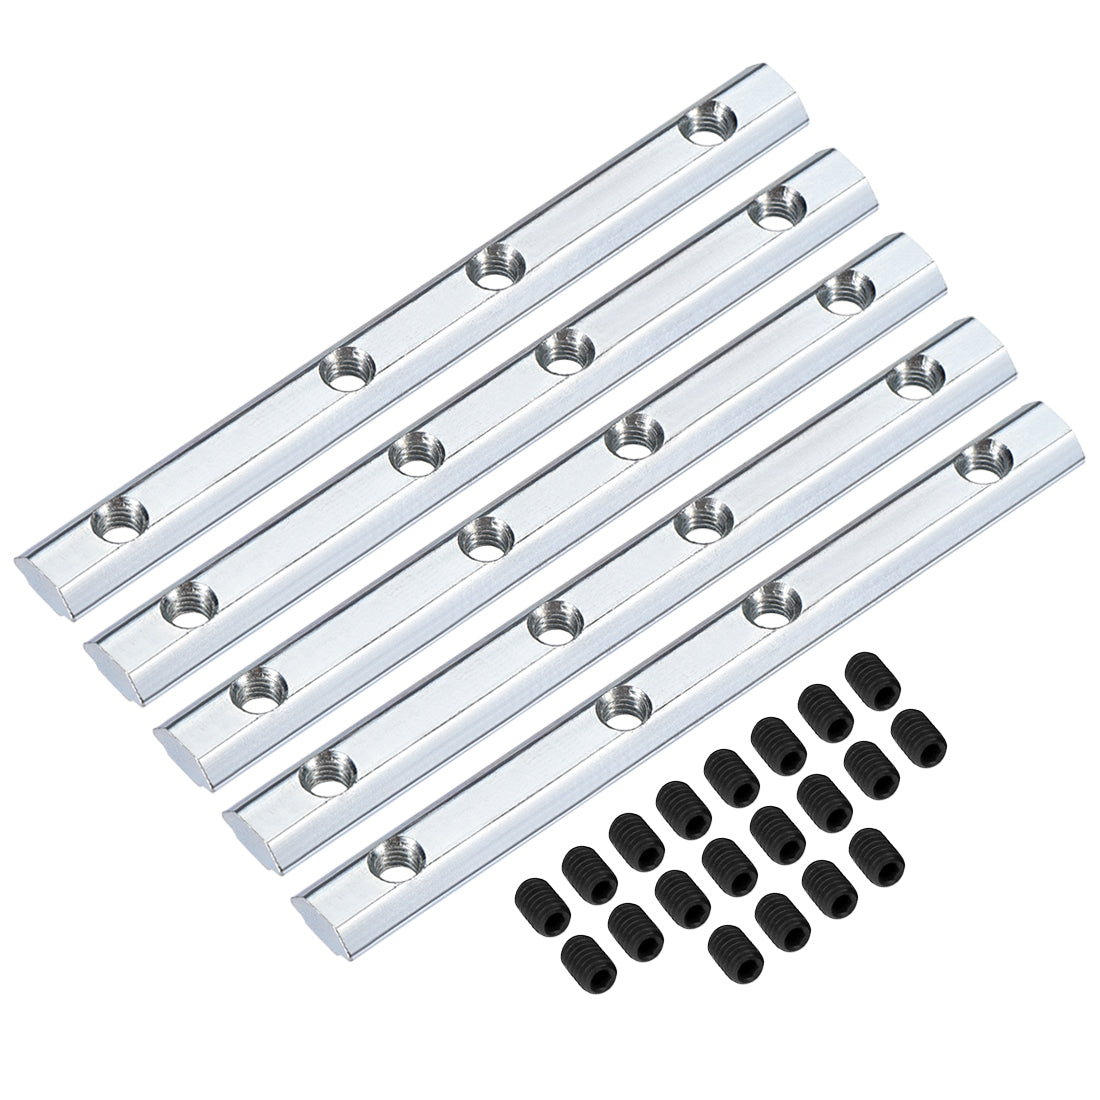 uxcell Uxcell Straight Line Connector, 3.9 Inch Joint Bracket with Screws for 2020 Series T Slot 6mm Aluminum Extrusion Profile, 5 Pcs